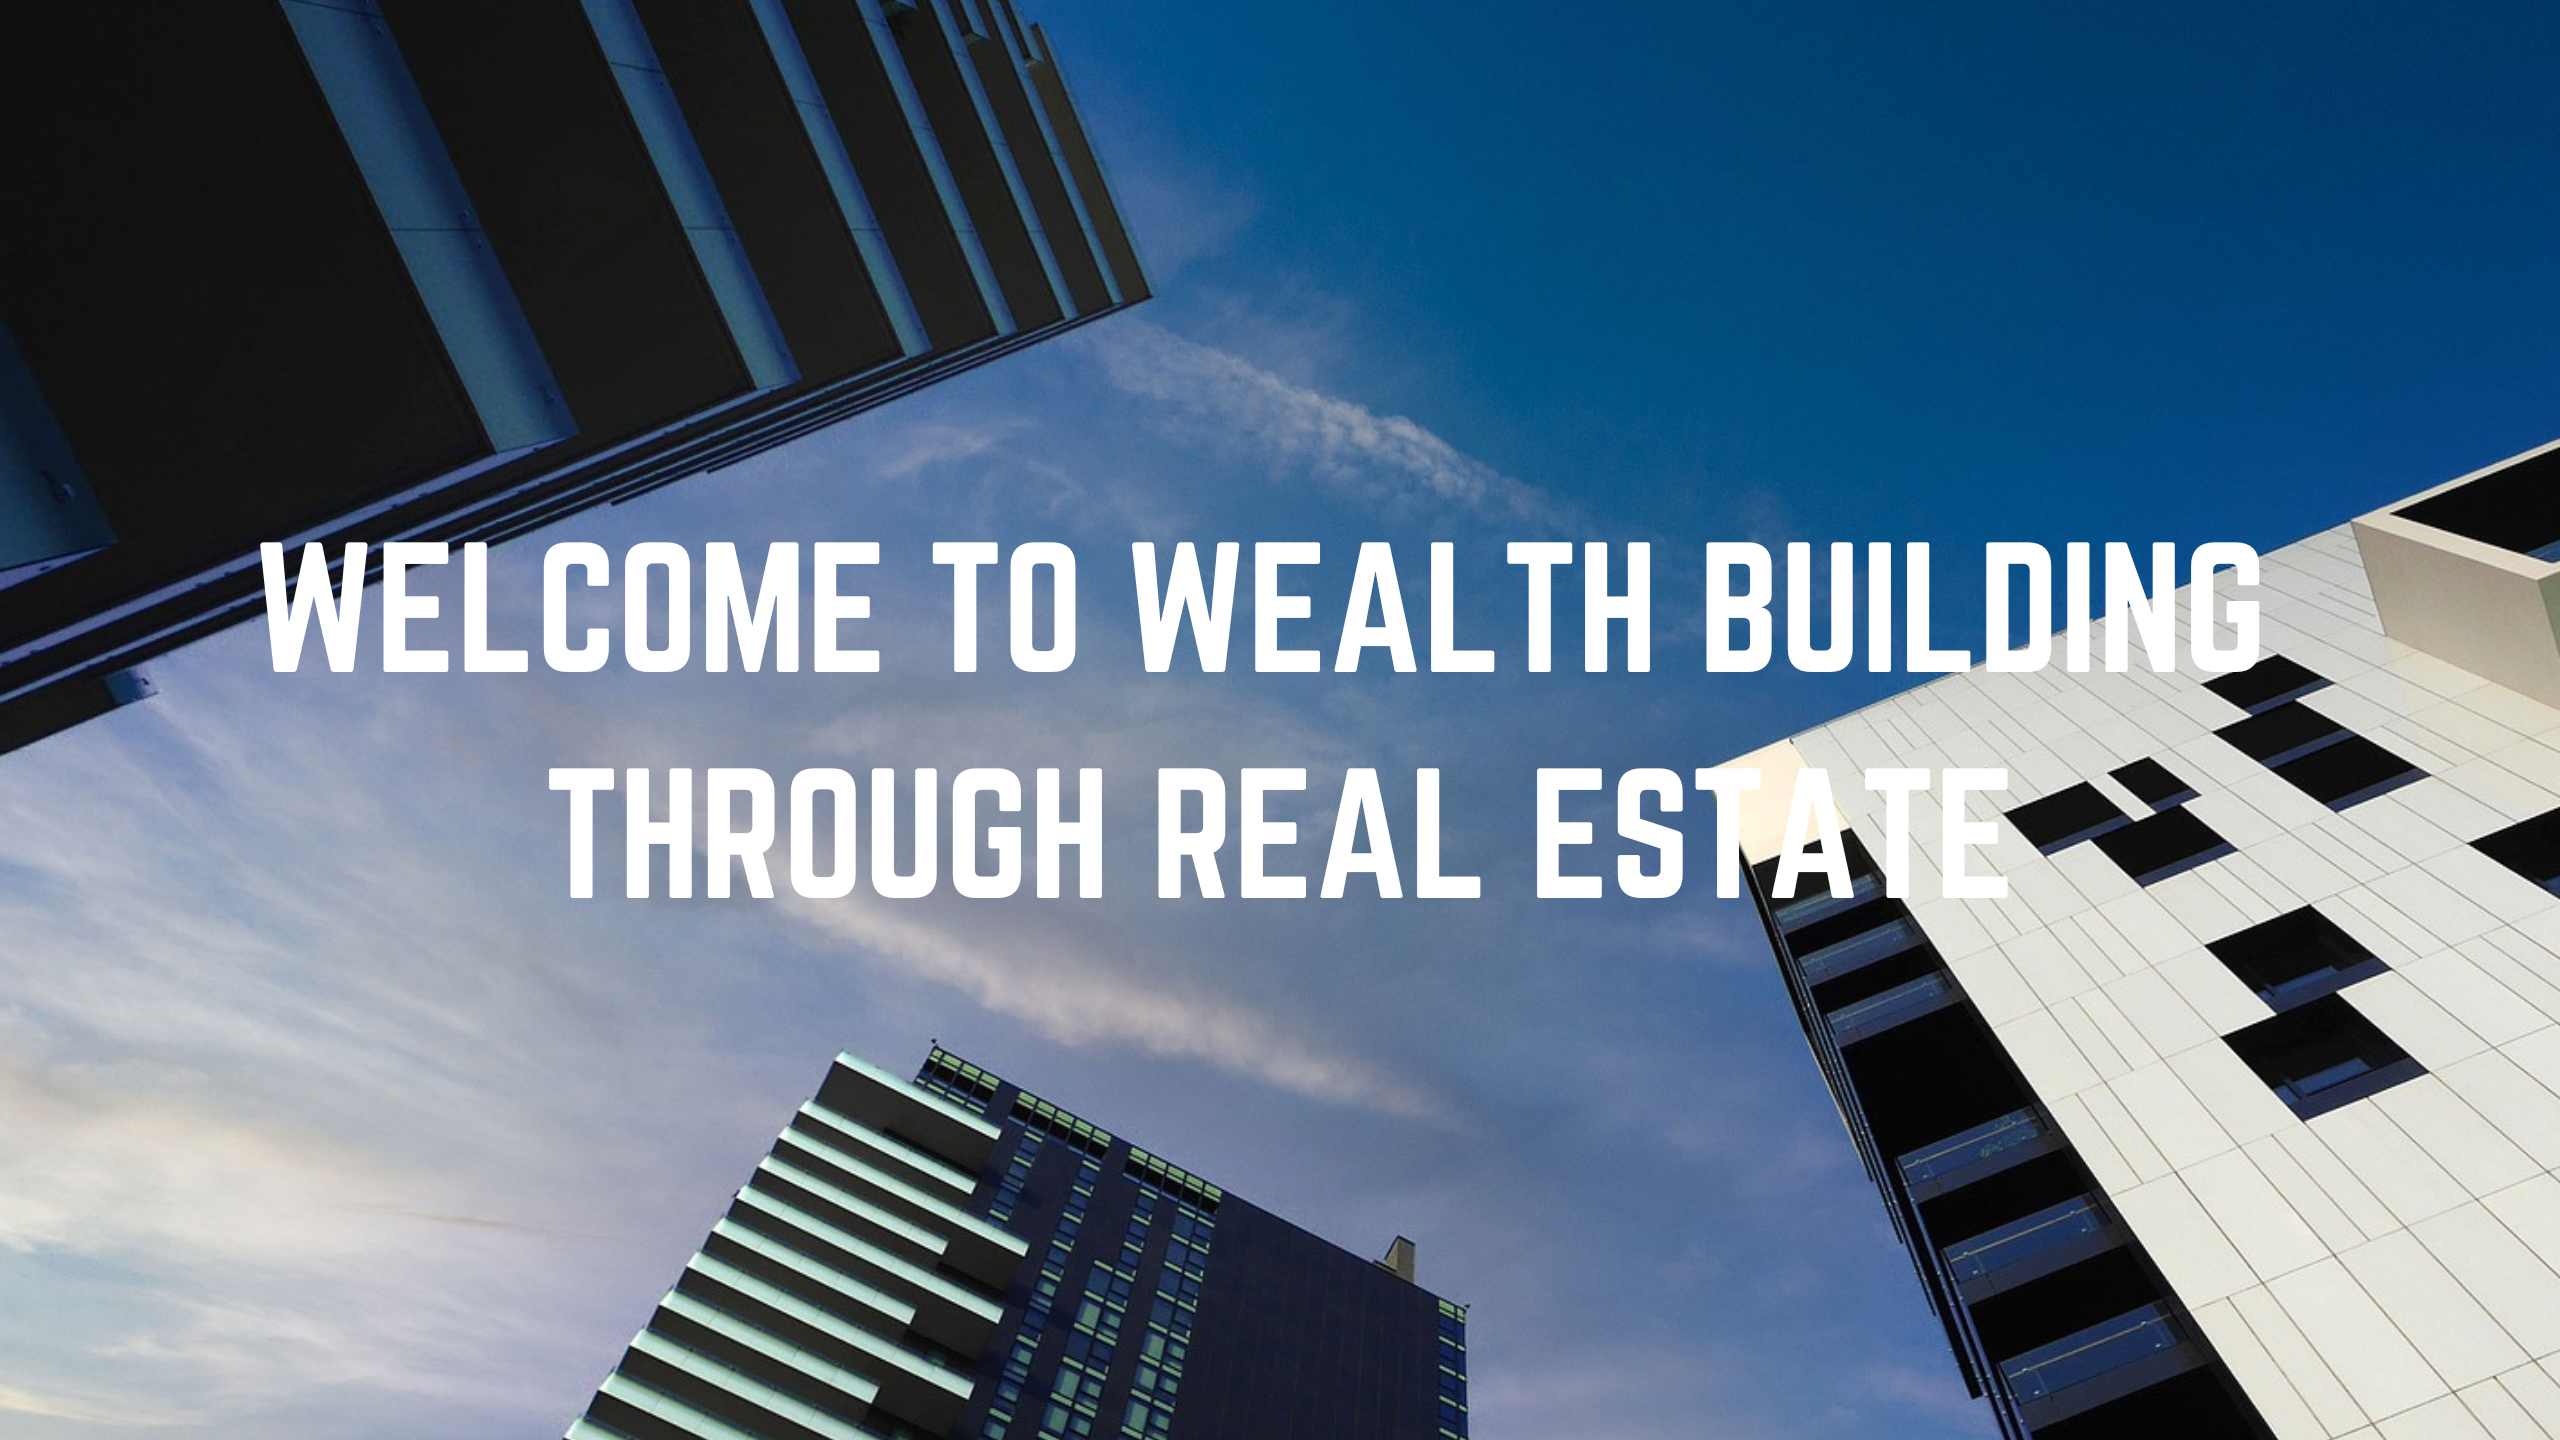 WELCOME TO WEALTH BUILDING THROUGH REAL ESTATE (1)